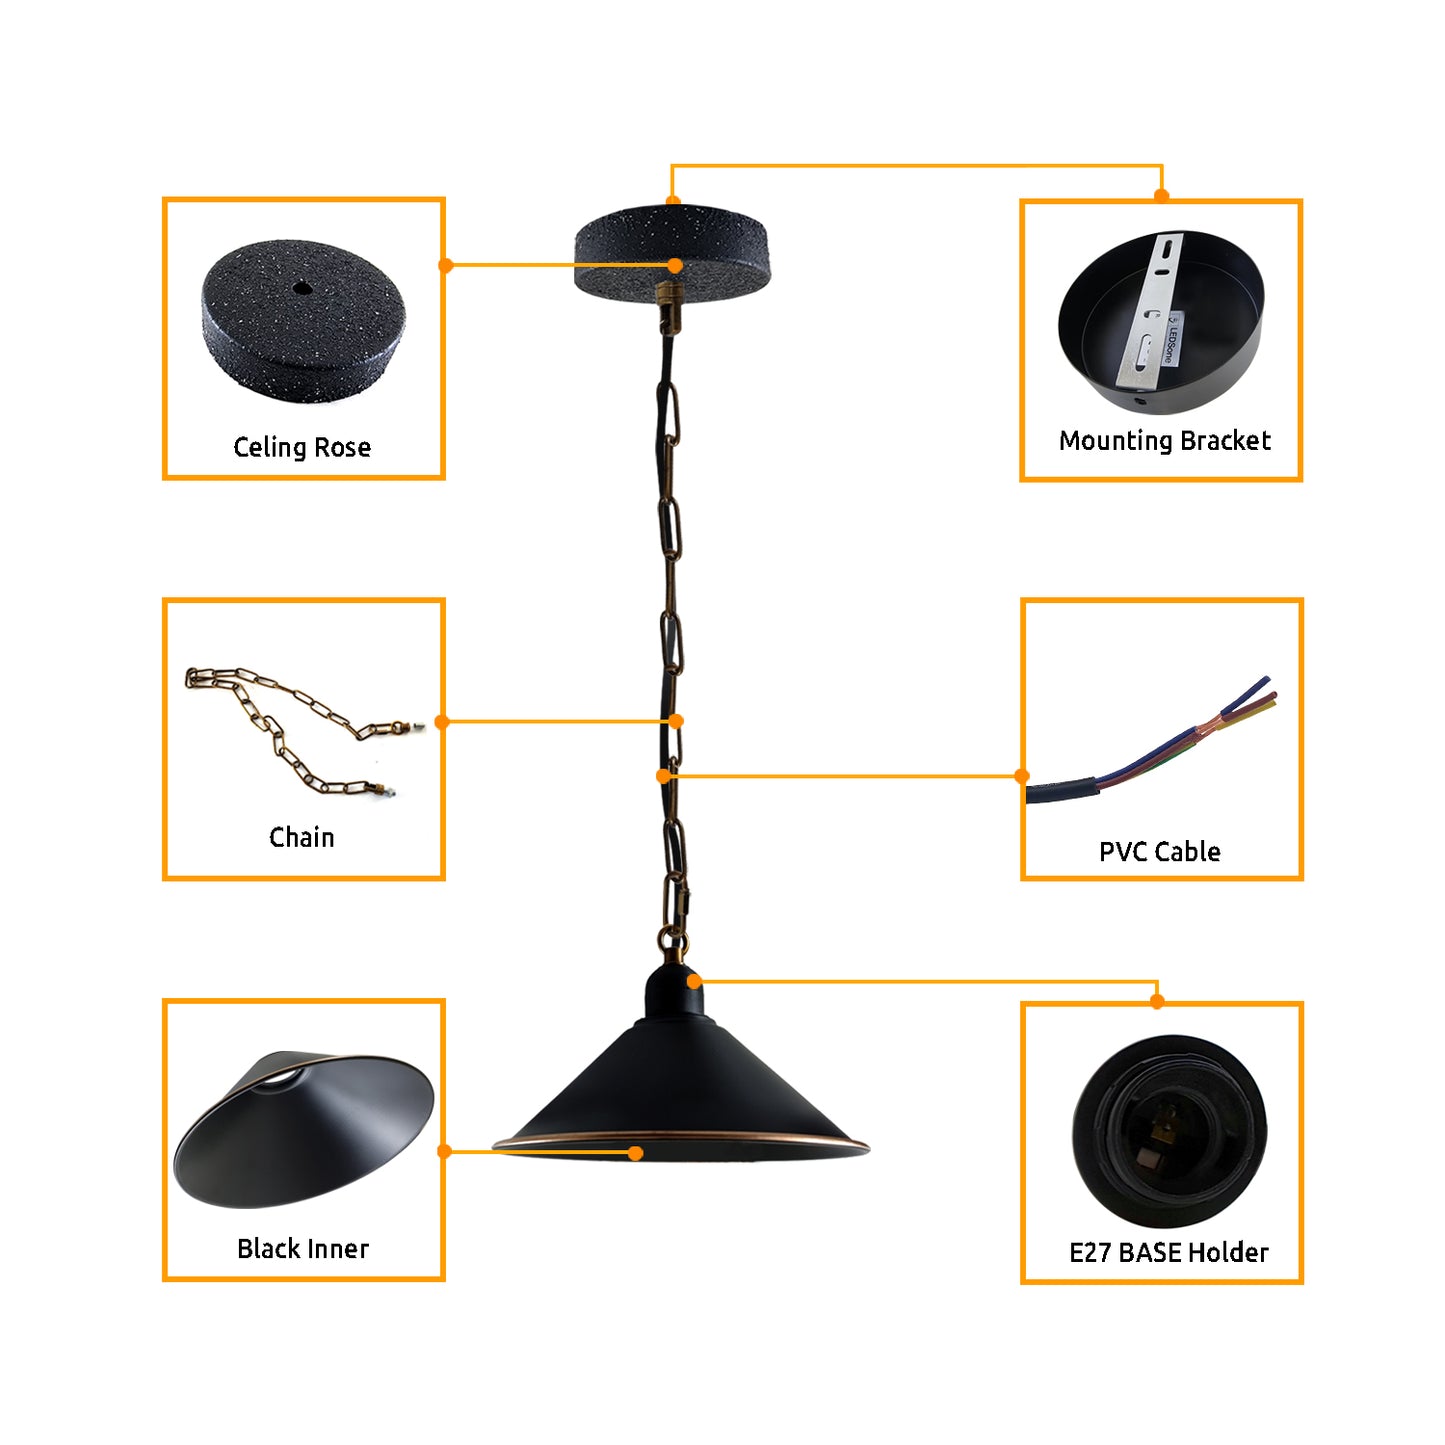 Vintage Metal Black Cone shaped pendant light fitting with chain 